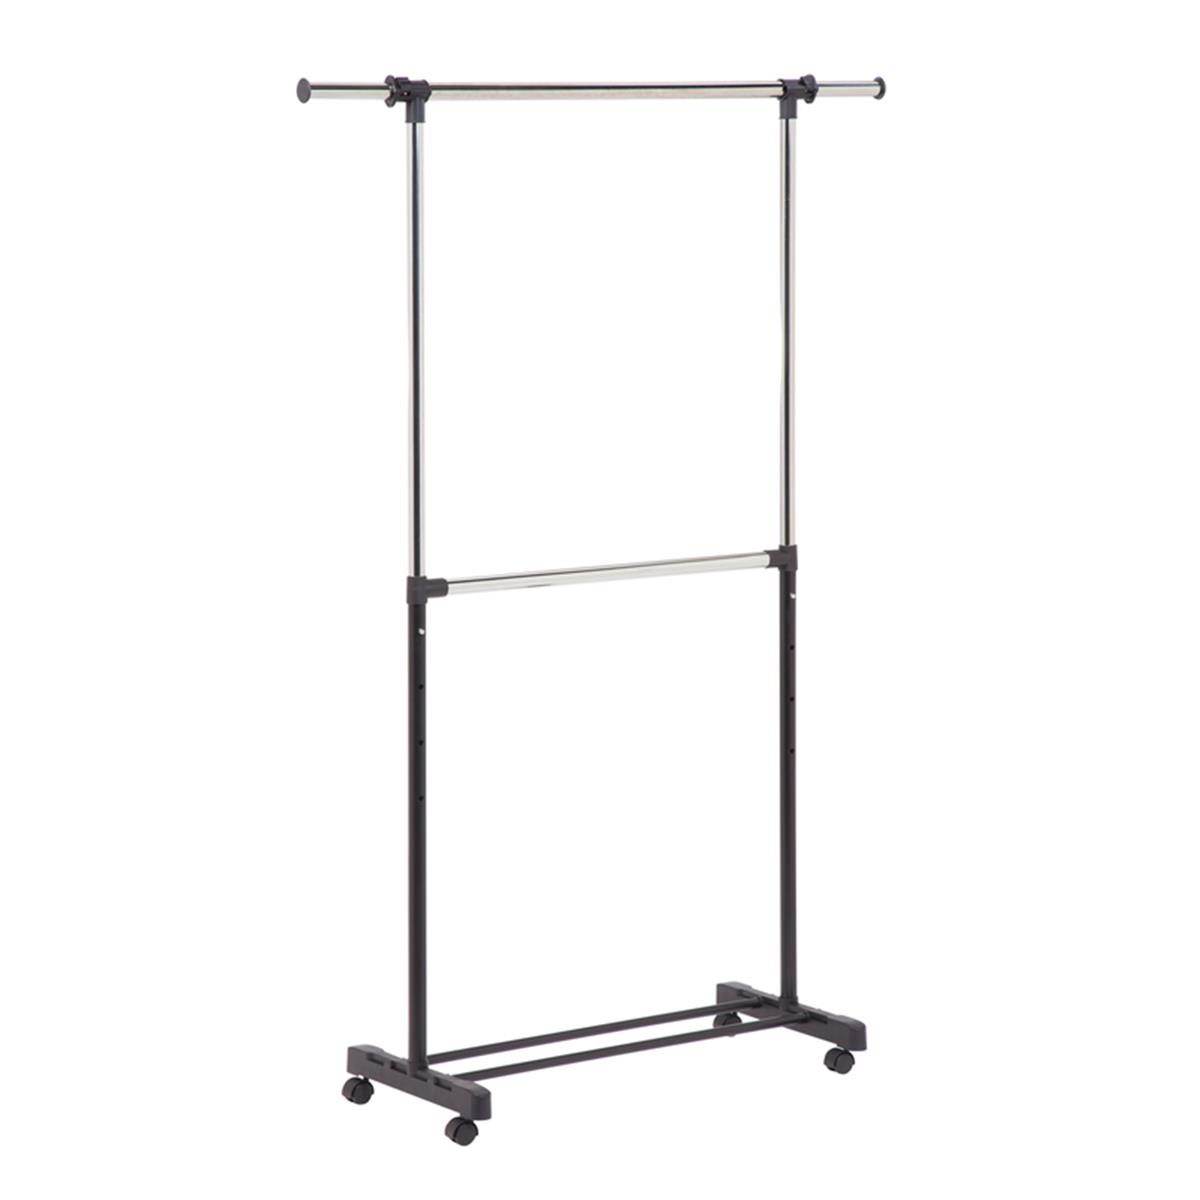 Picture of Honey Can Do 5763826 73 x 60 x 17 in. Chrome Double Bar Garment Rack